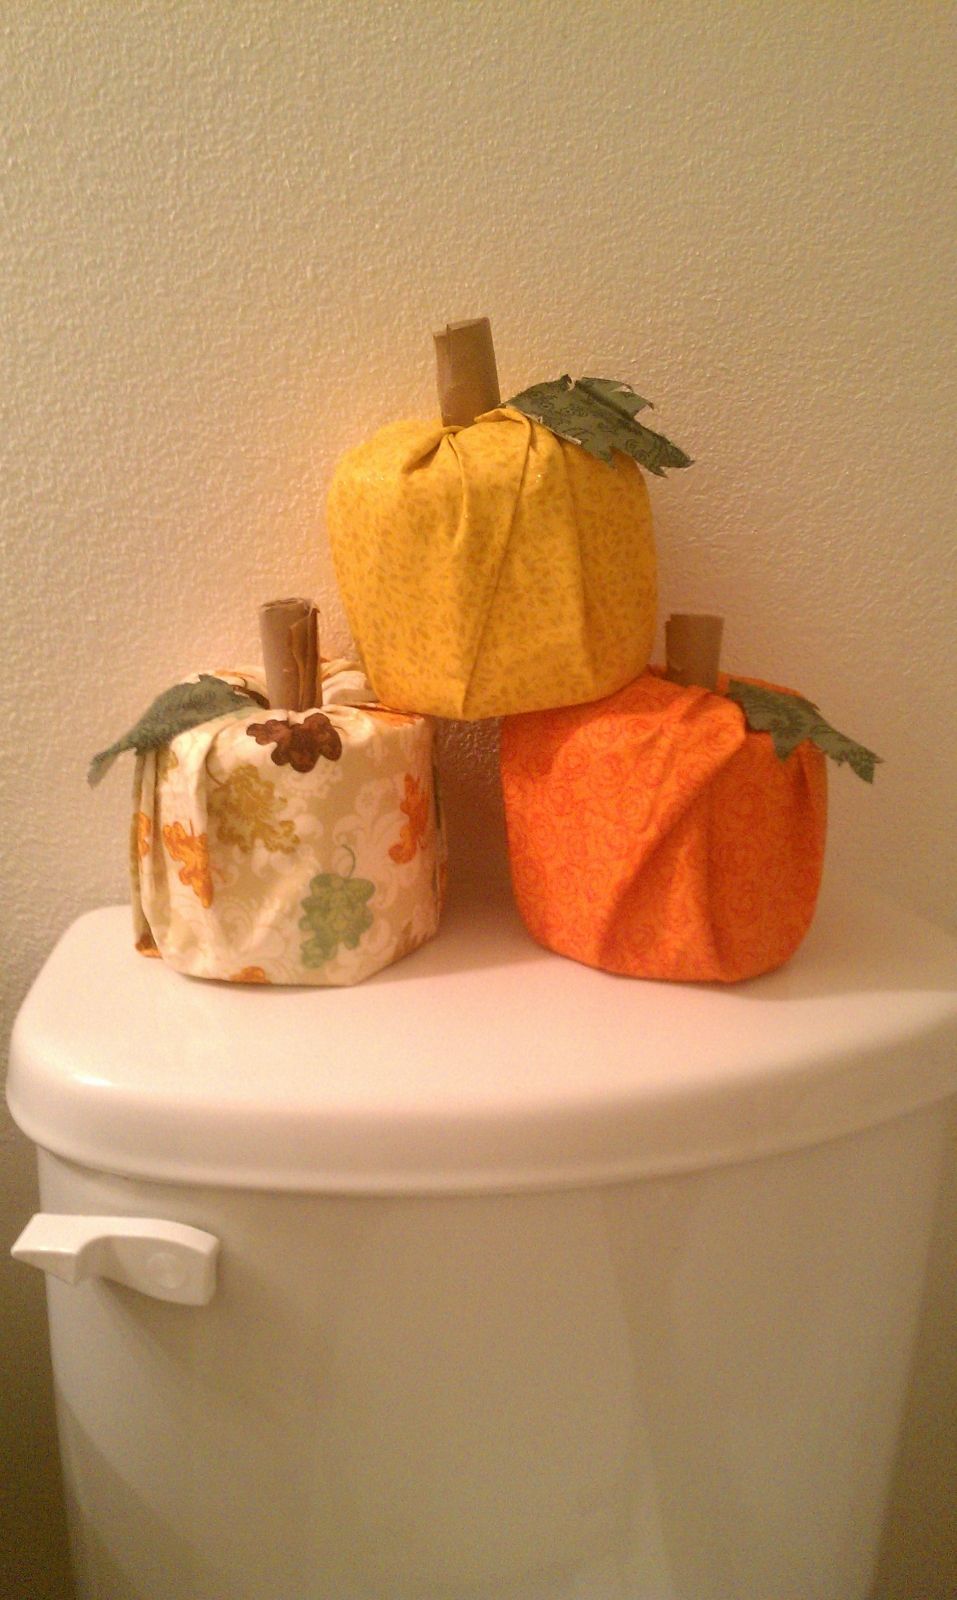 You can even “fall-up” your bathroom by decorating your Extra TP with autumn decore.  Silly